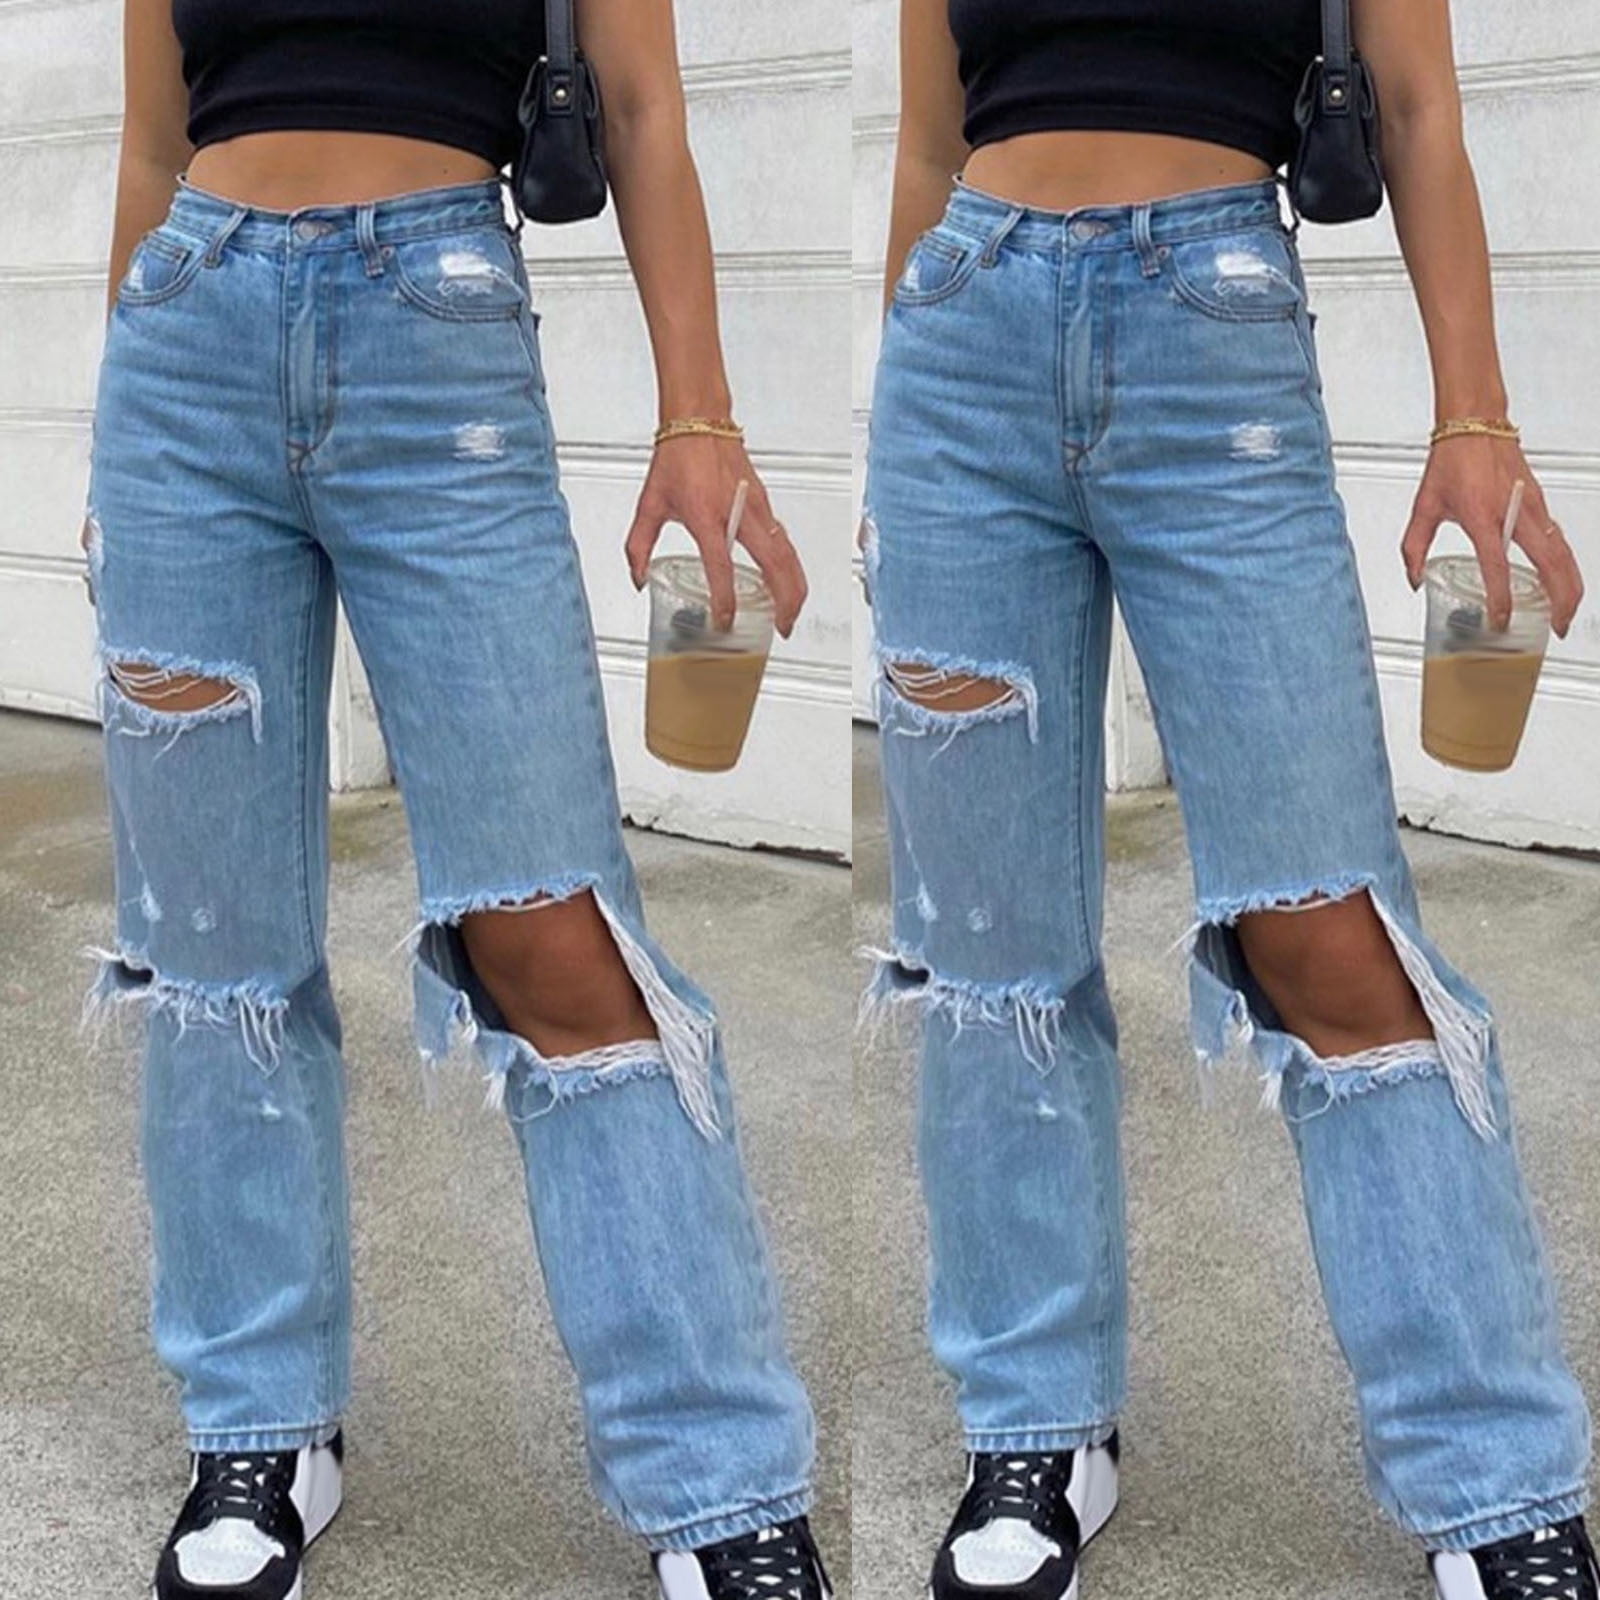 Sayhi Women Washed Distressed High Waist Straight Flare Jeans Denim Pants